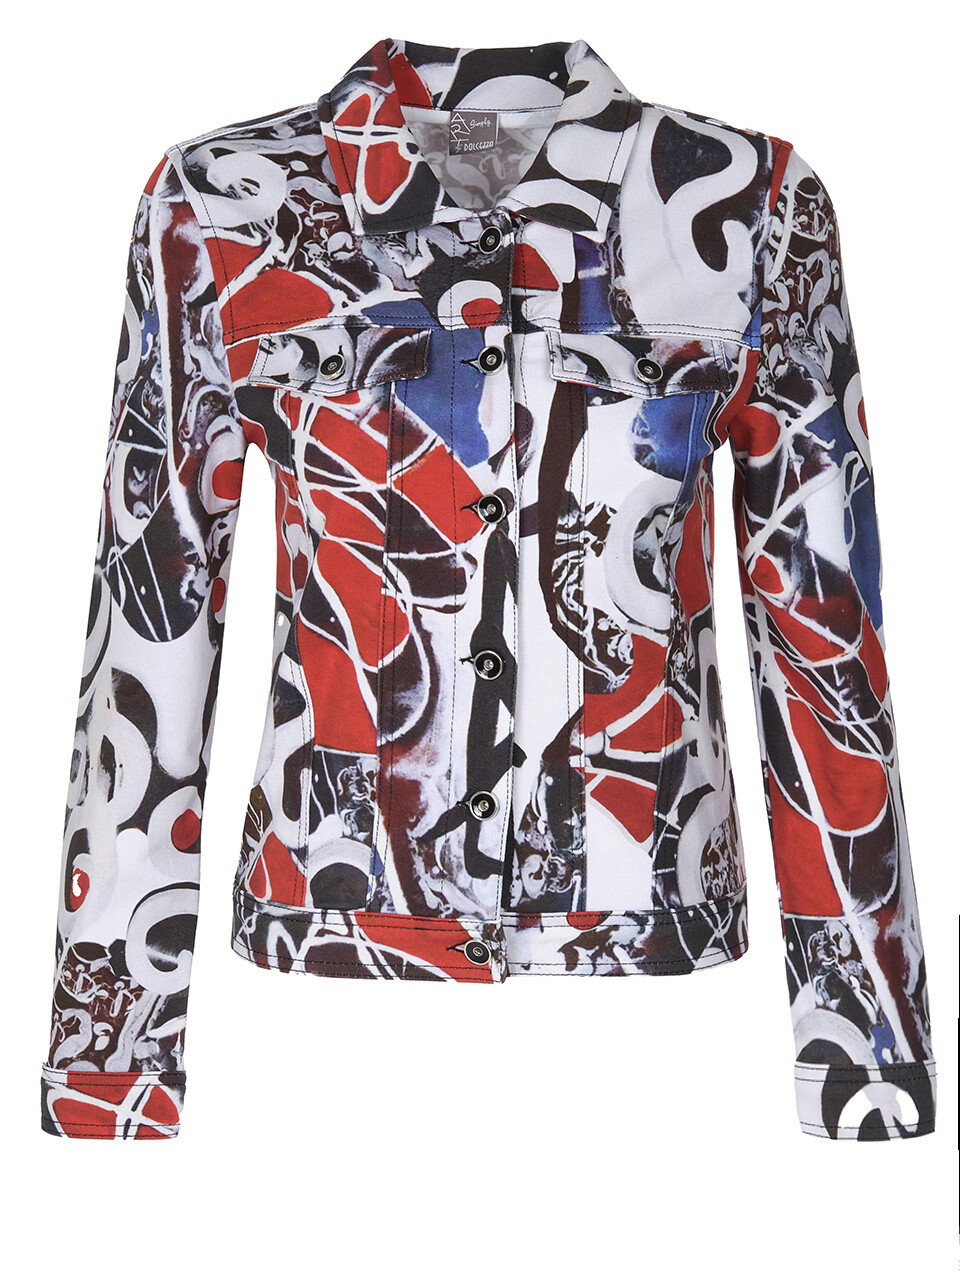 Simply Art Dolcezza: Lovely Lovers Abstract Art Soft Denim Jacket